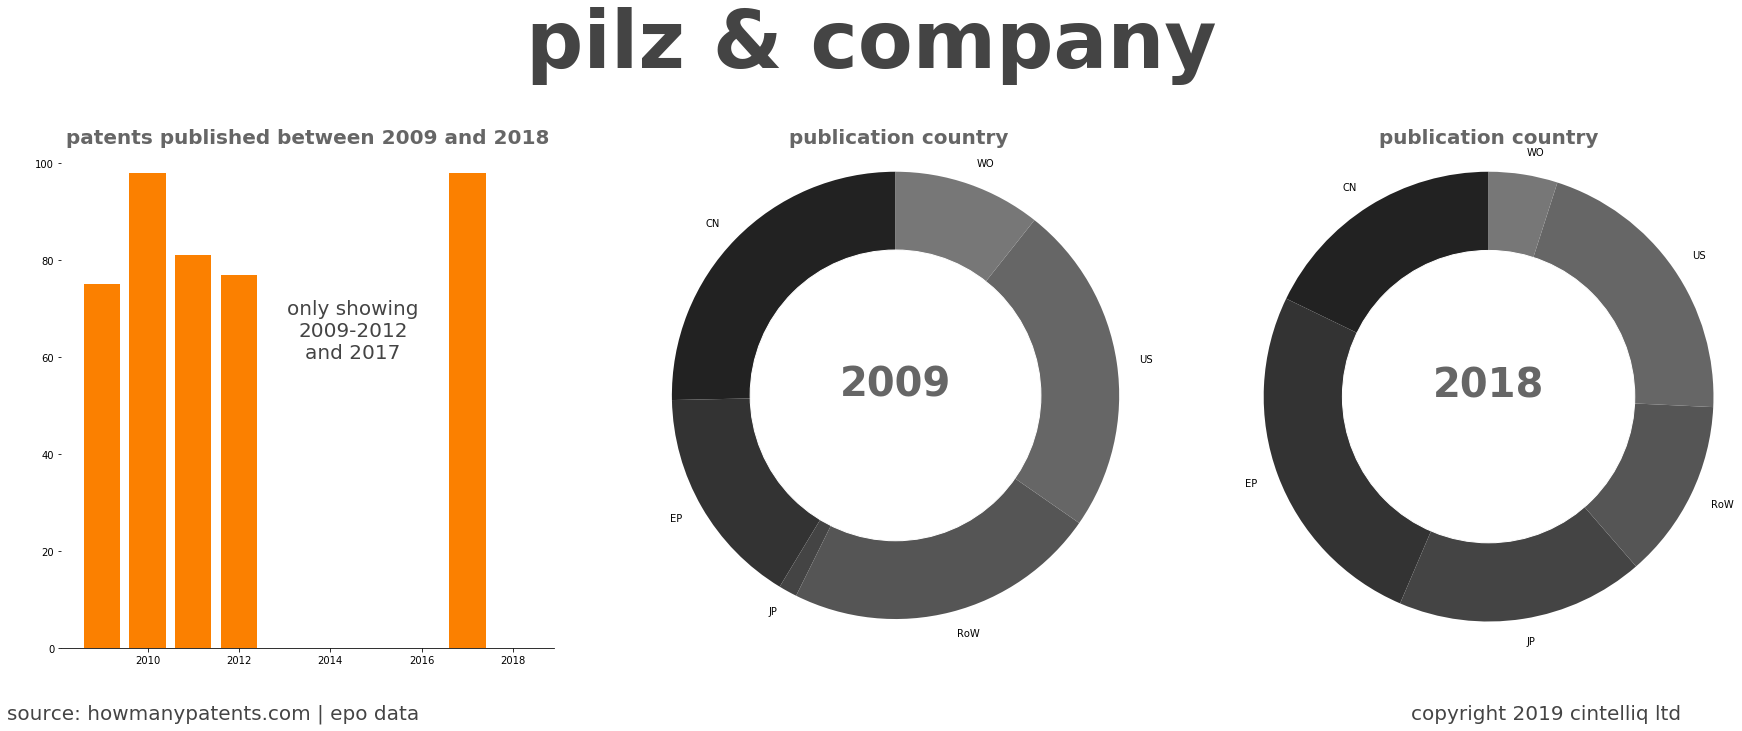 summary of patents for Pilz & Company